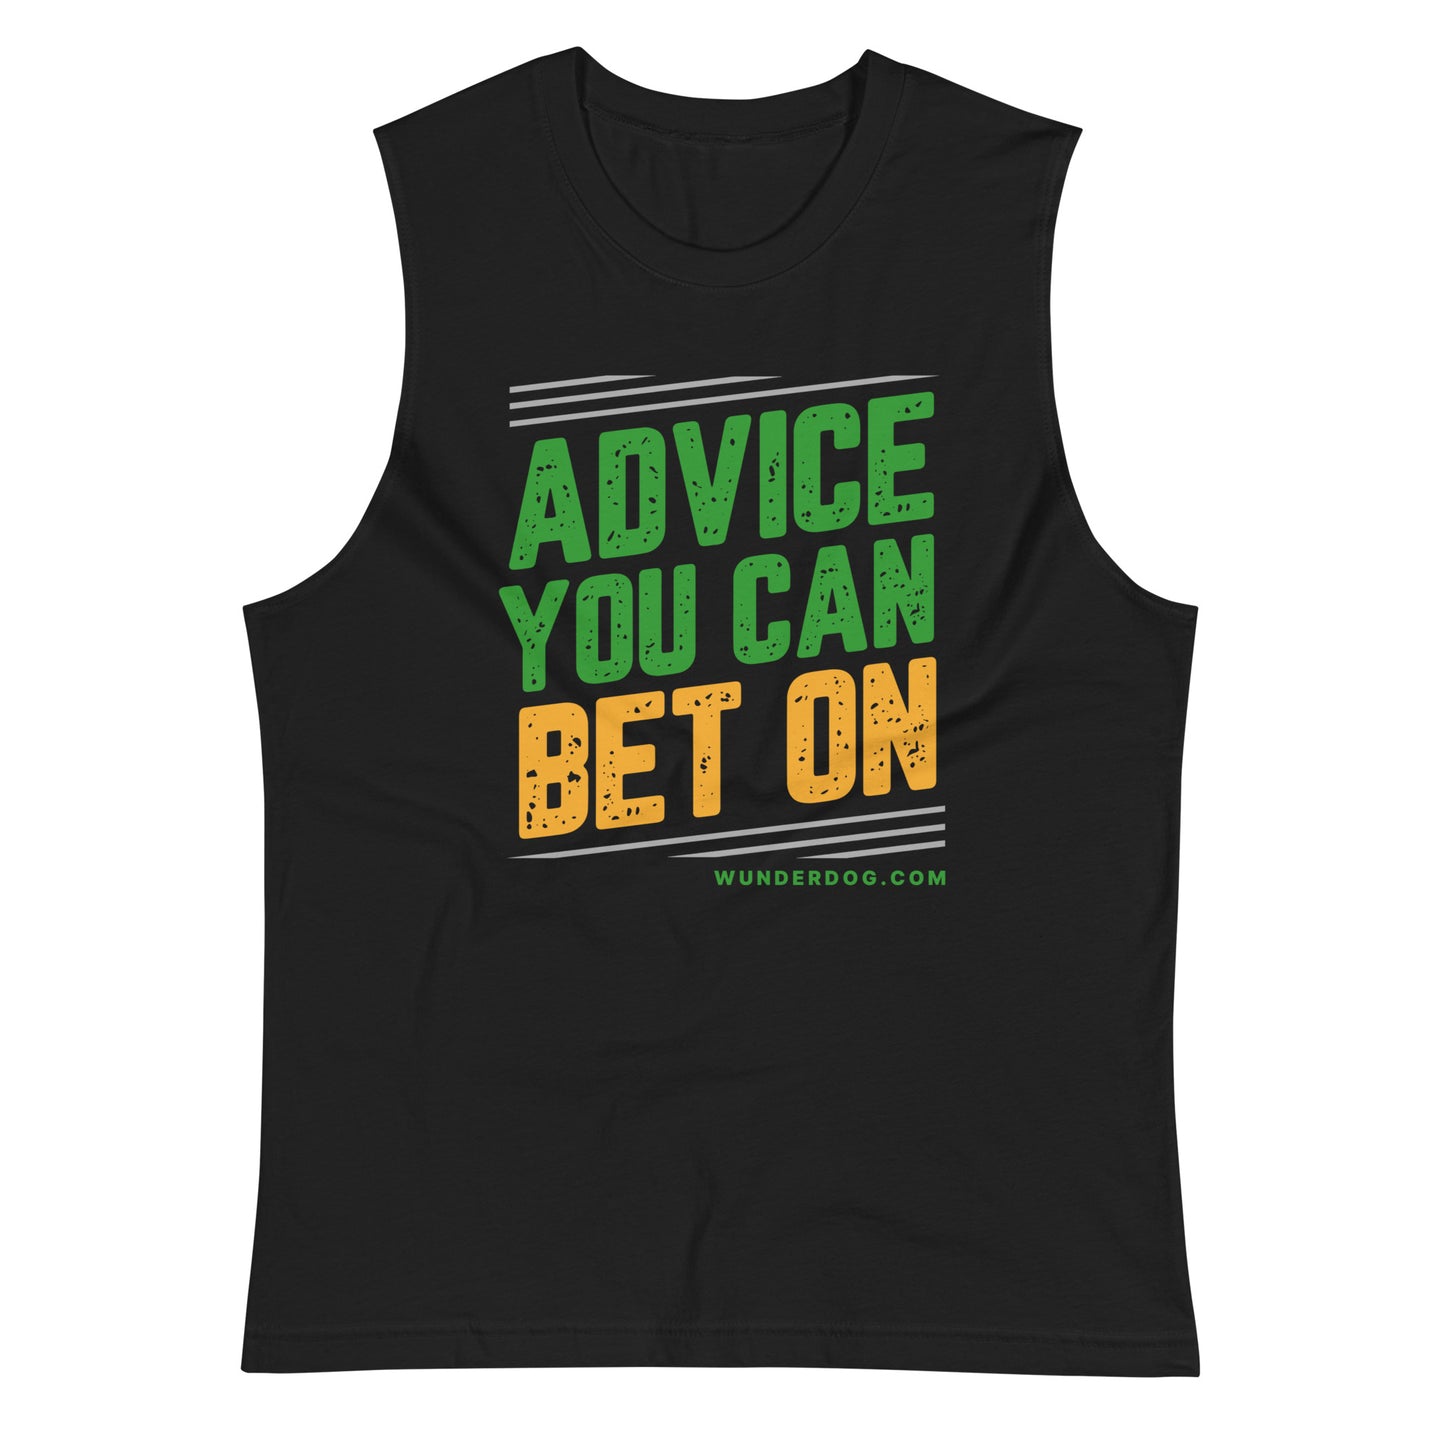 Advice You Can Bet On Unisex Muscle Shirt